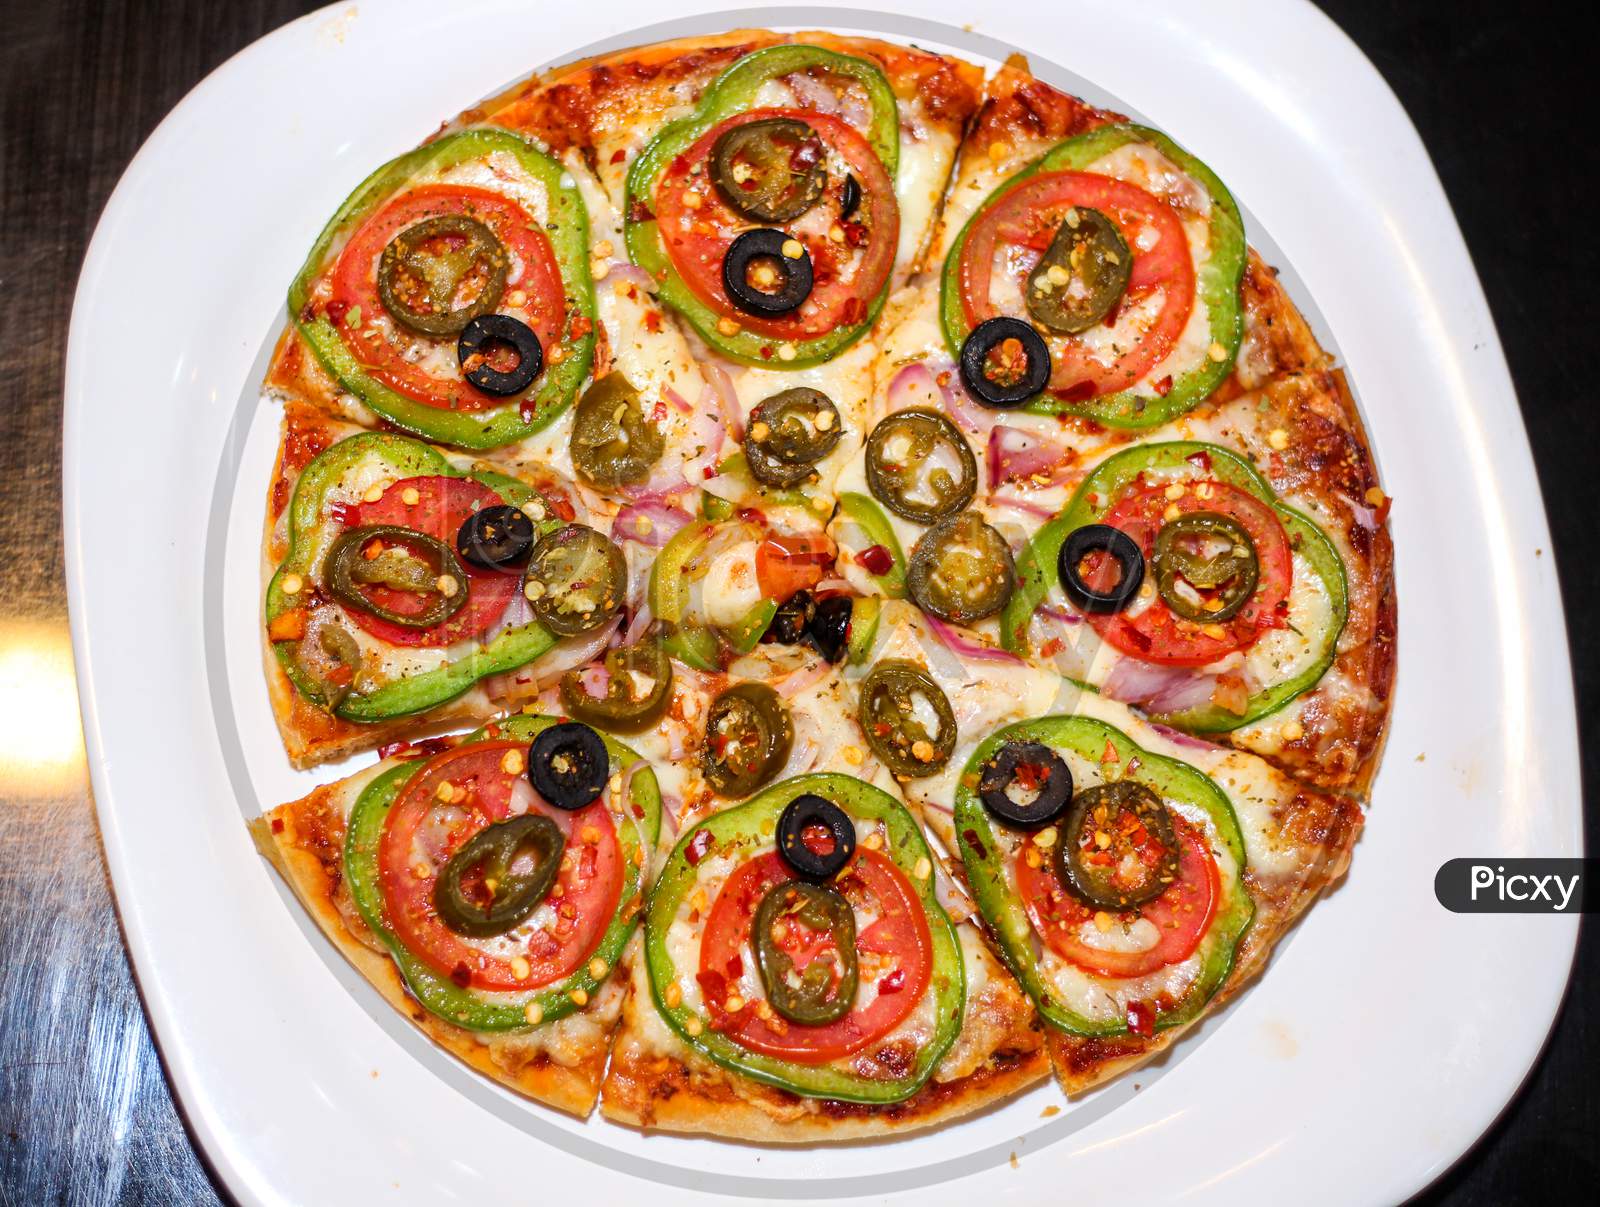 Fresh And Tasty Pizza With Vegetables, Tomato, Onion And Olives Isolated On White Plate. Top View